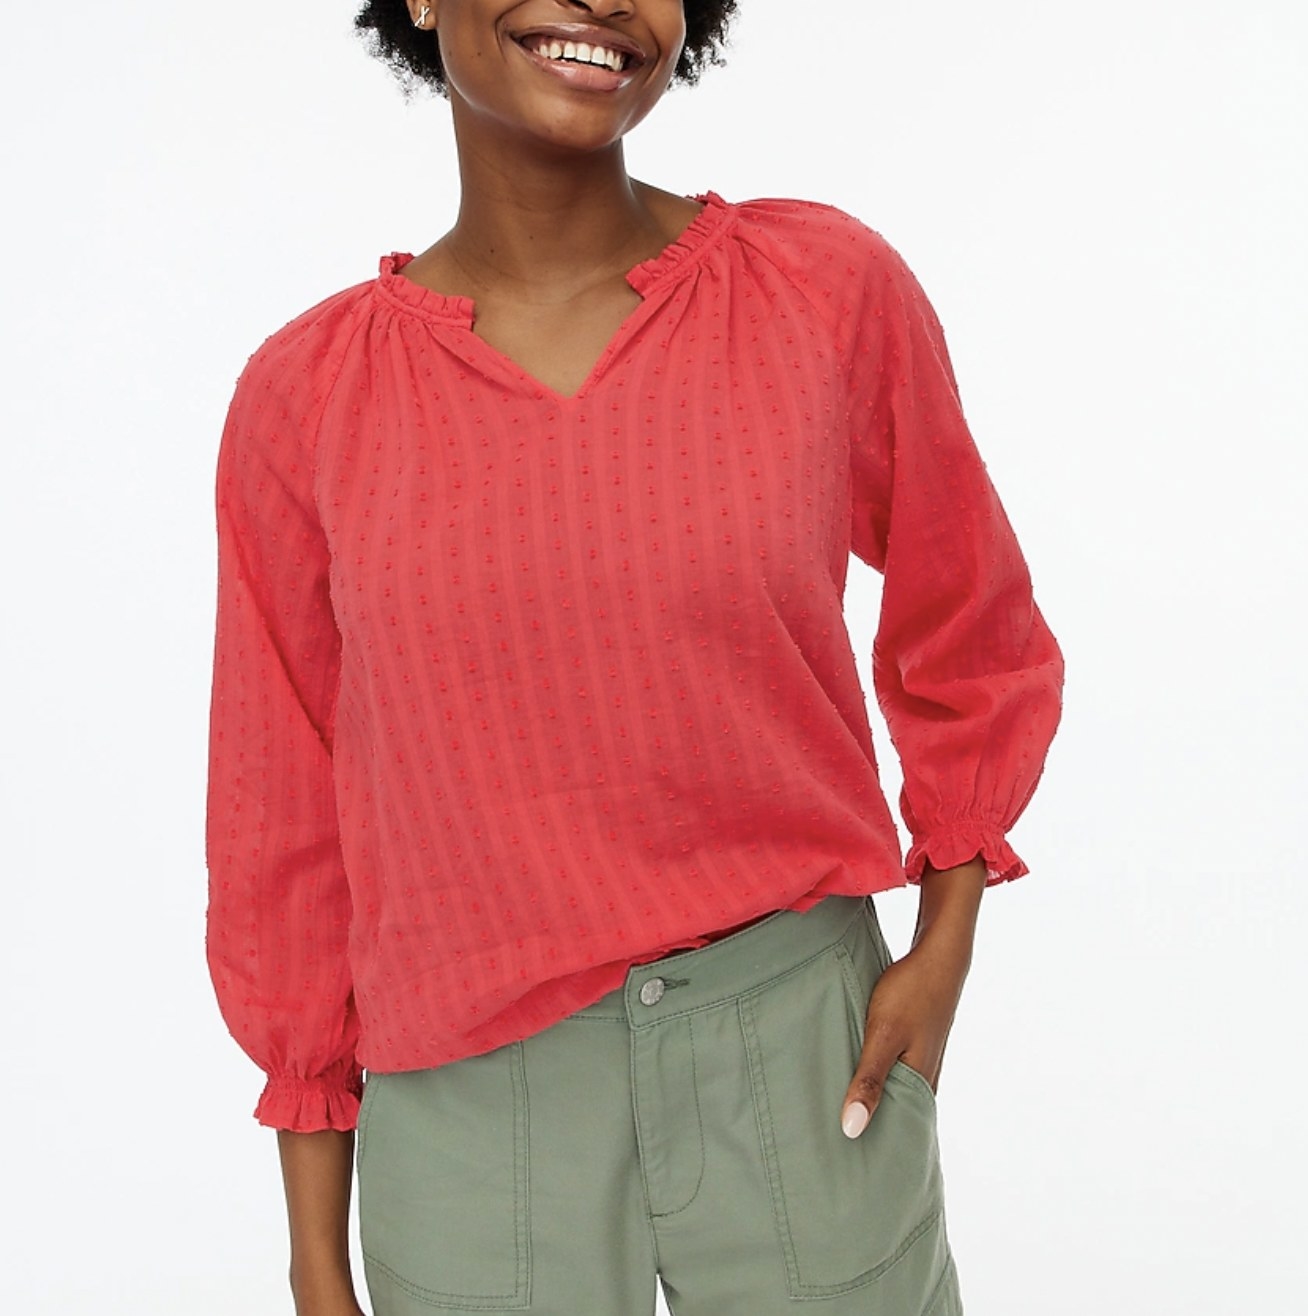 Model wearing the peach top slightly tucked into green pants